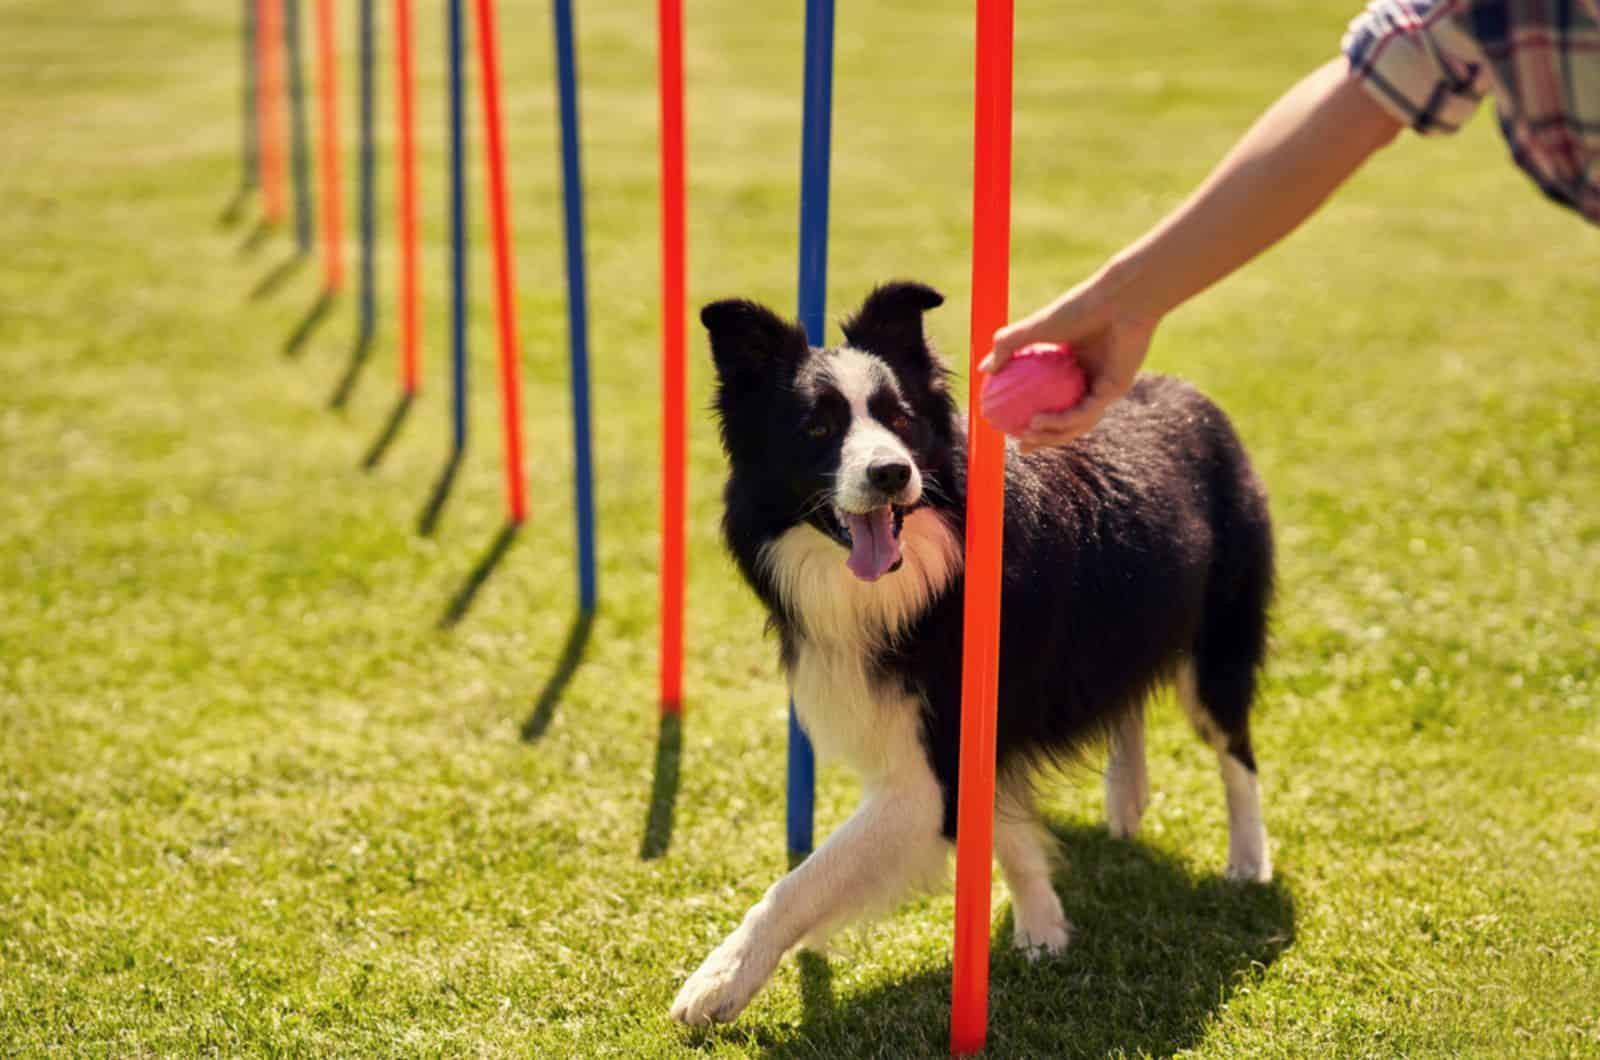 7 Of The Most Creative Ways To Train Your Dog Properly